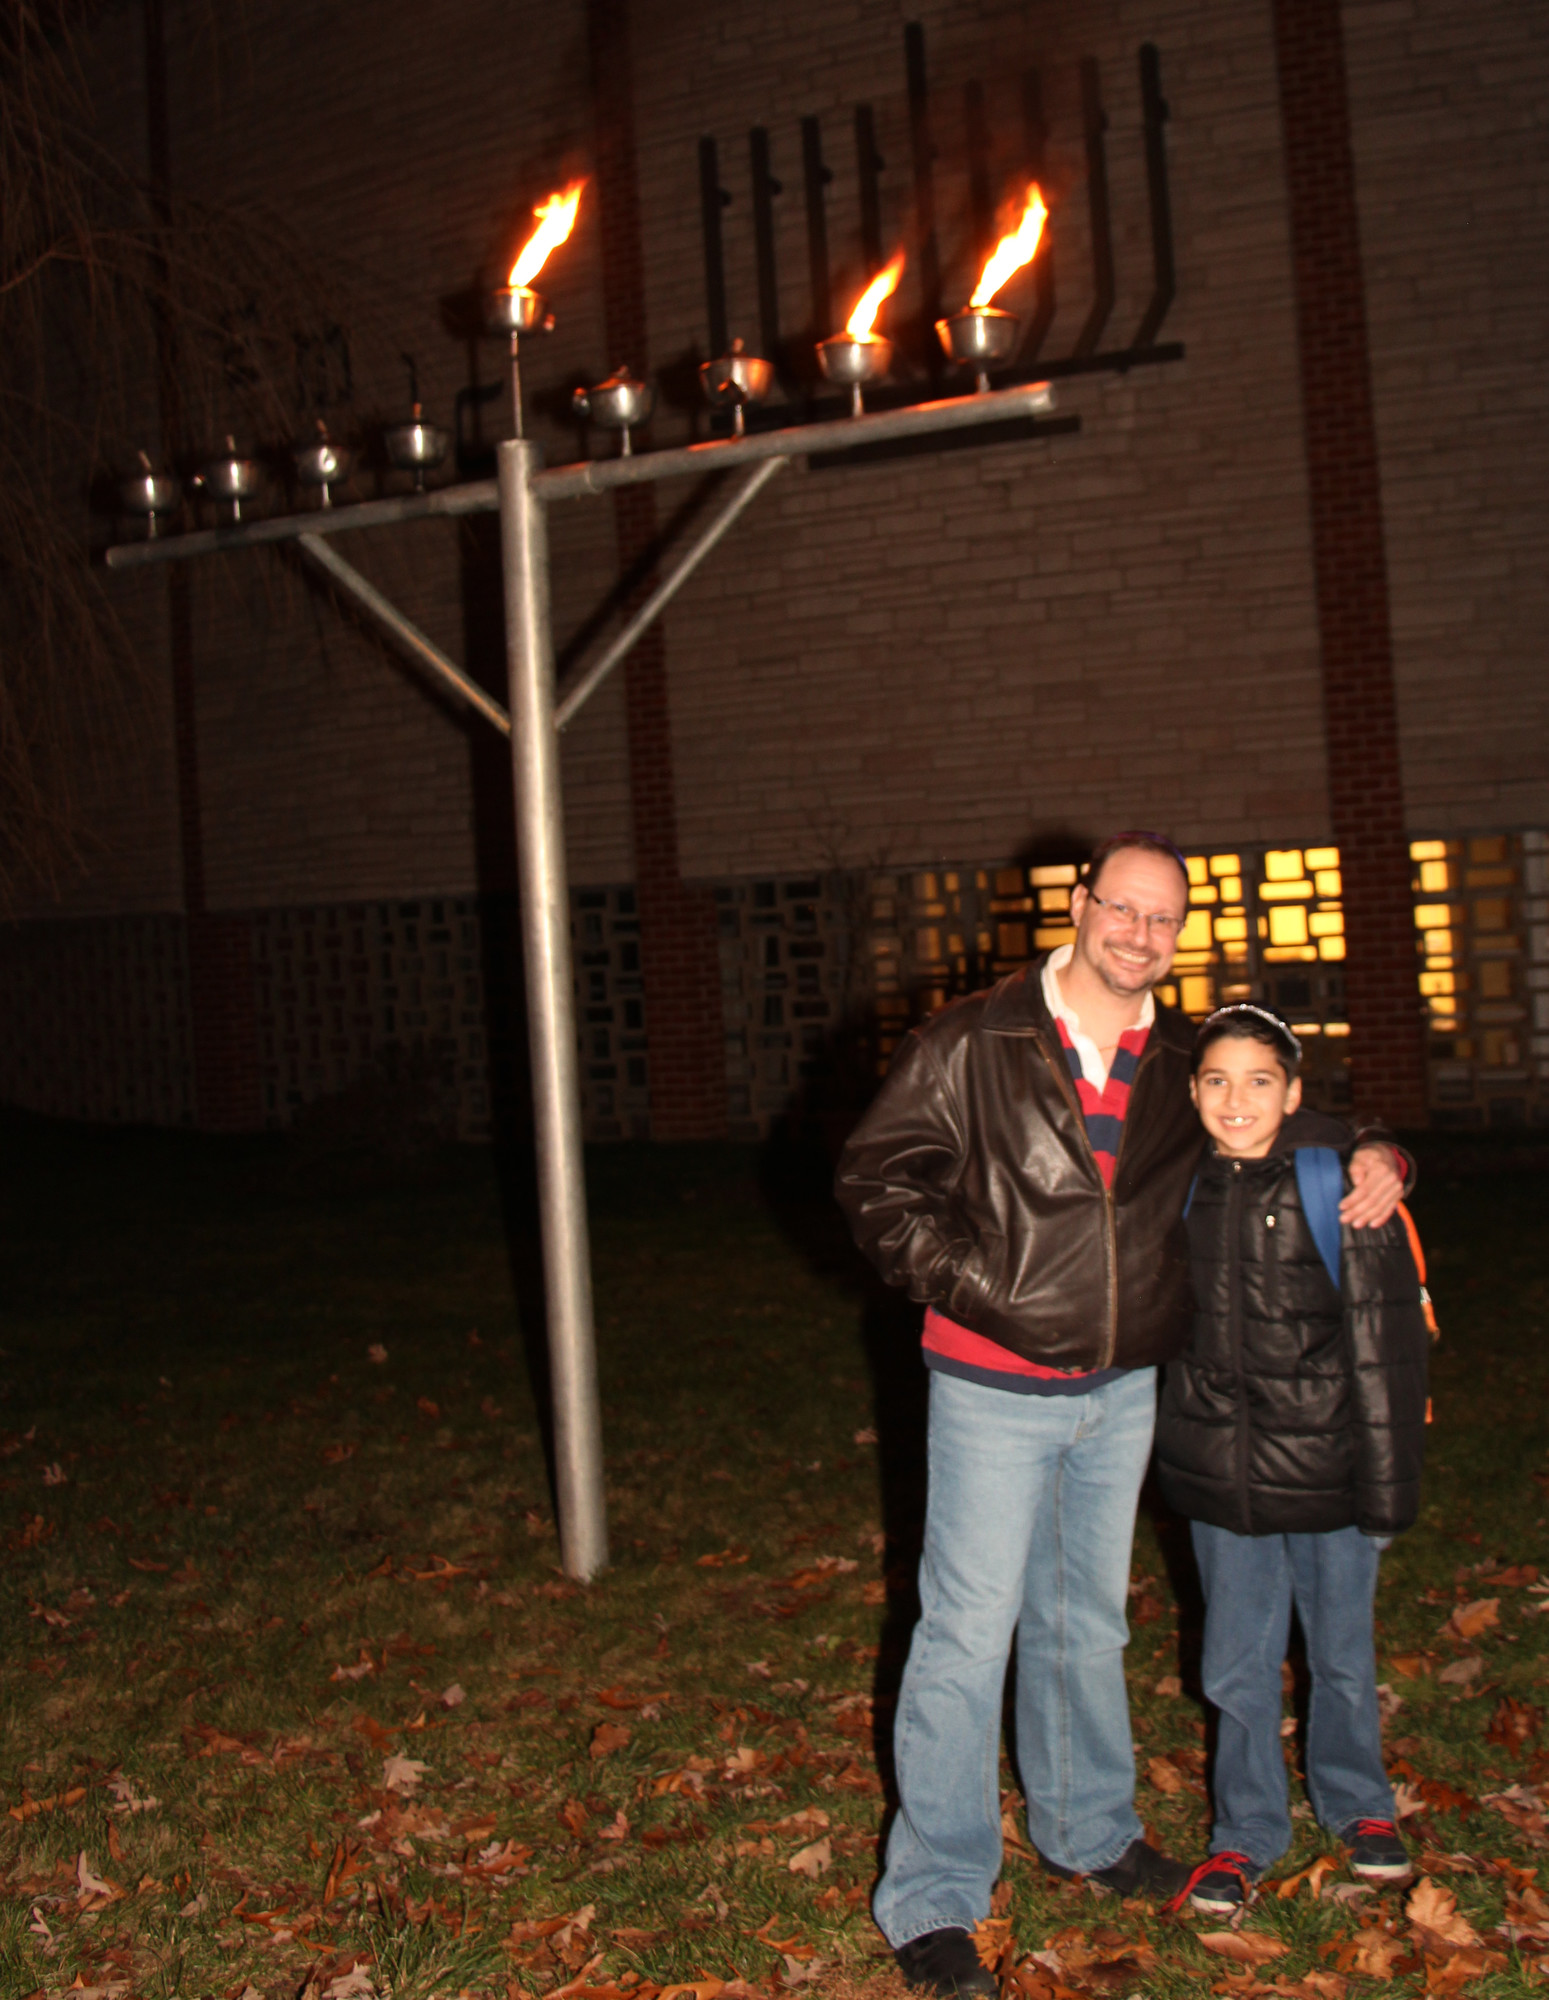 Jordan Silver and his son Adam (11yrs) celebrate the Chanukah Holidays at the East Meadow Jewish Center.